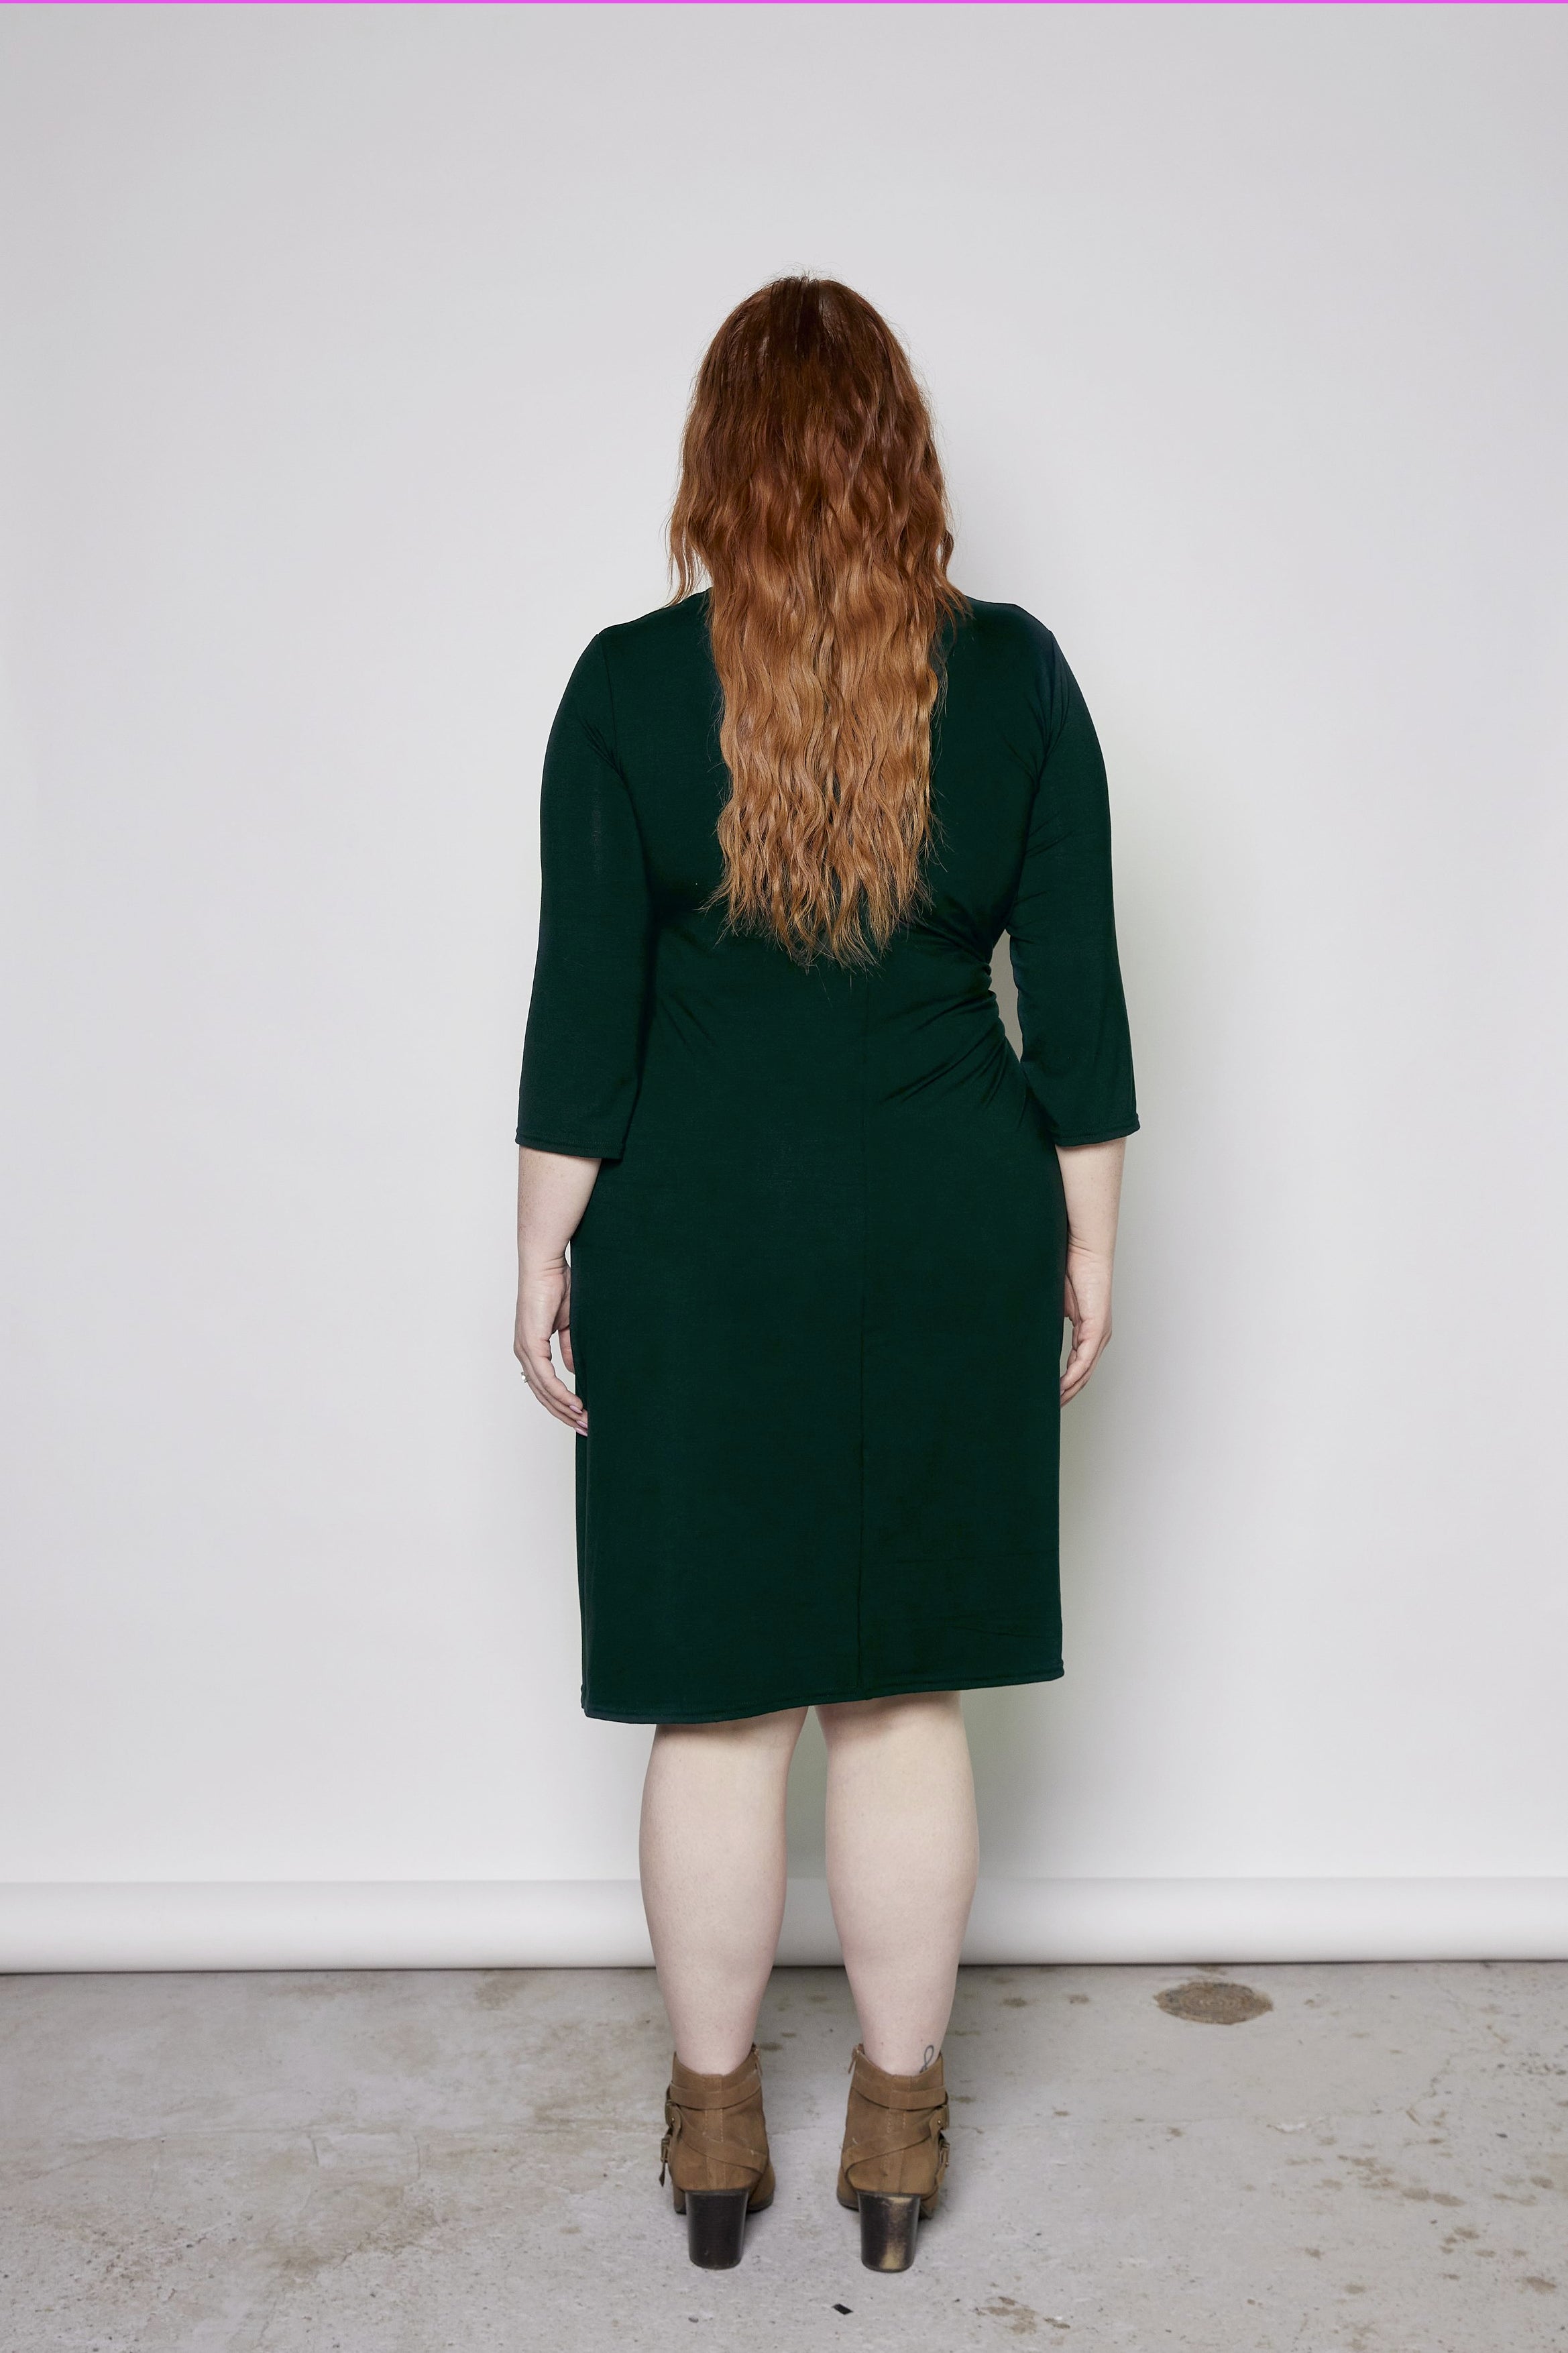 Mariela Dress by Tangente, Evergreen, back view, asymmetrical, draping at waist, built-in ties, 3/4 sleeve, anti-pill jersey, sizes XS to XXL, made in Ottawa